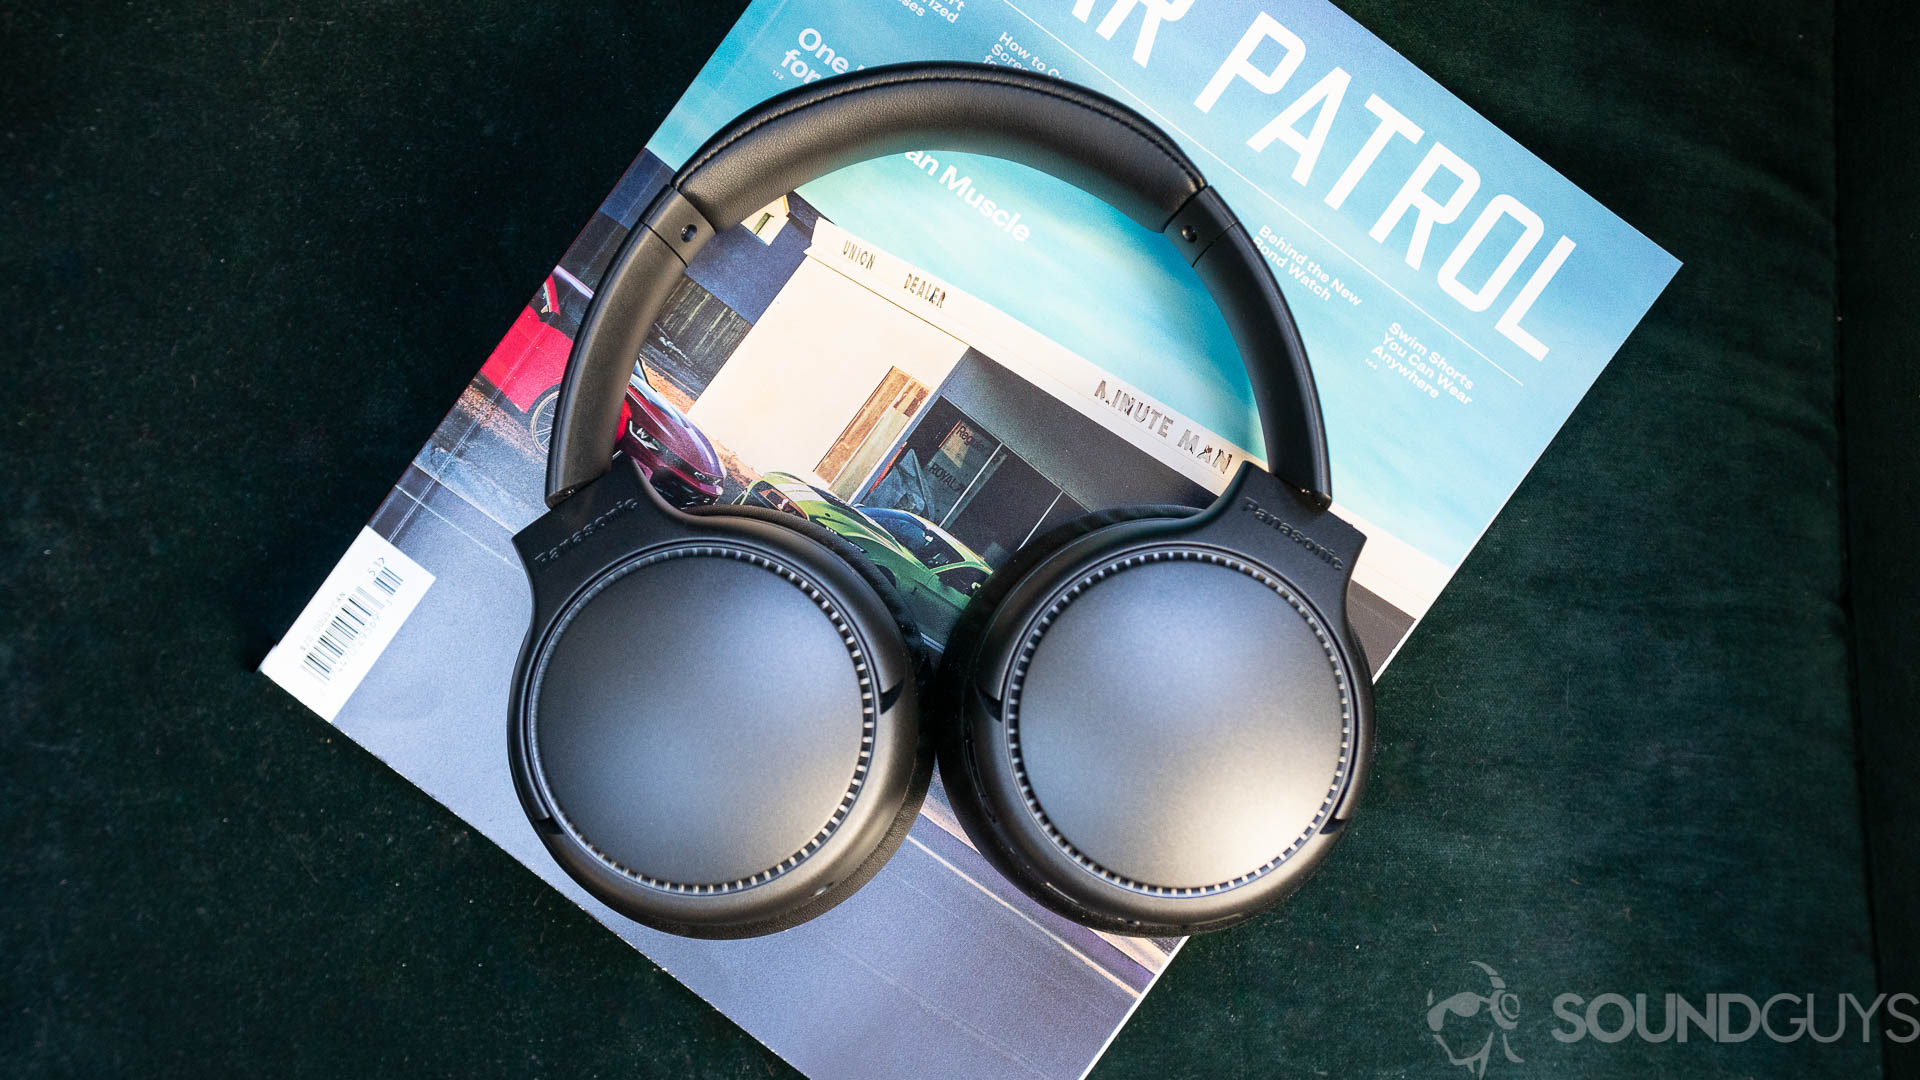 Pictured from above is the Panasonic RB-M700B headphones on top of a magazine on a green couch